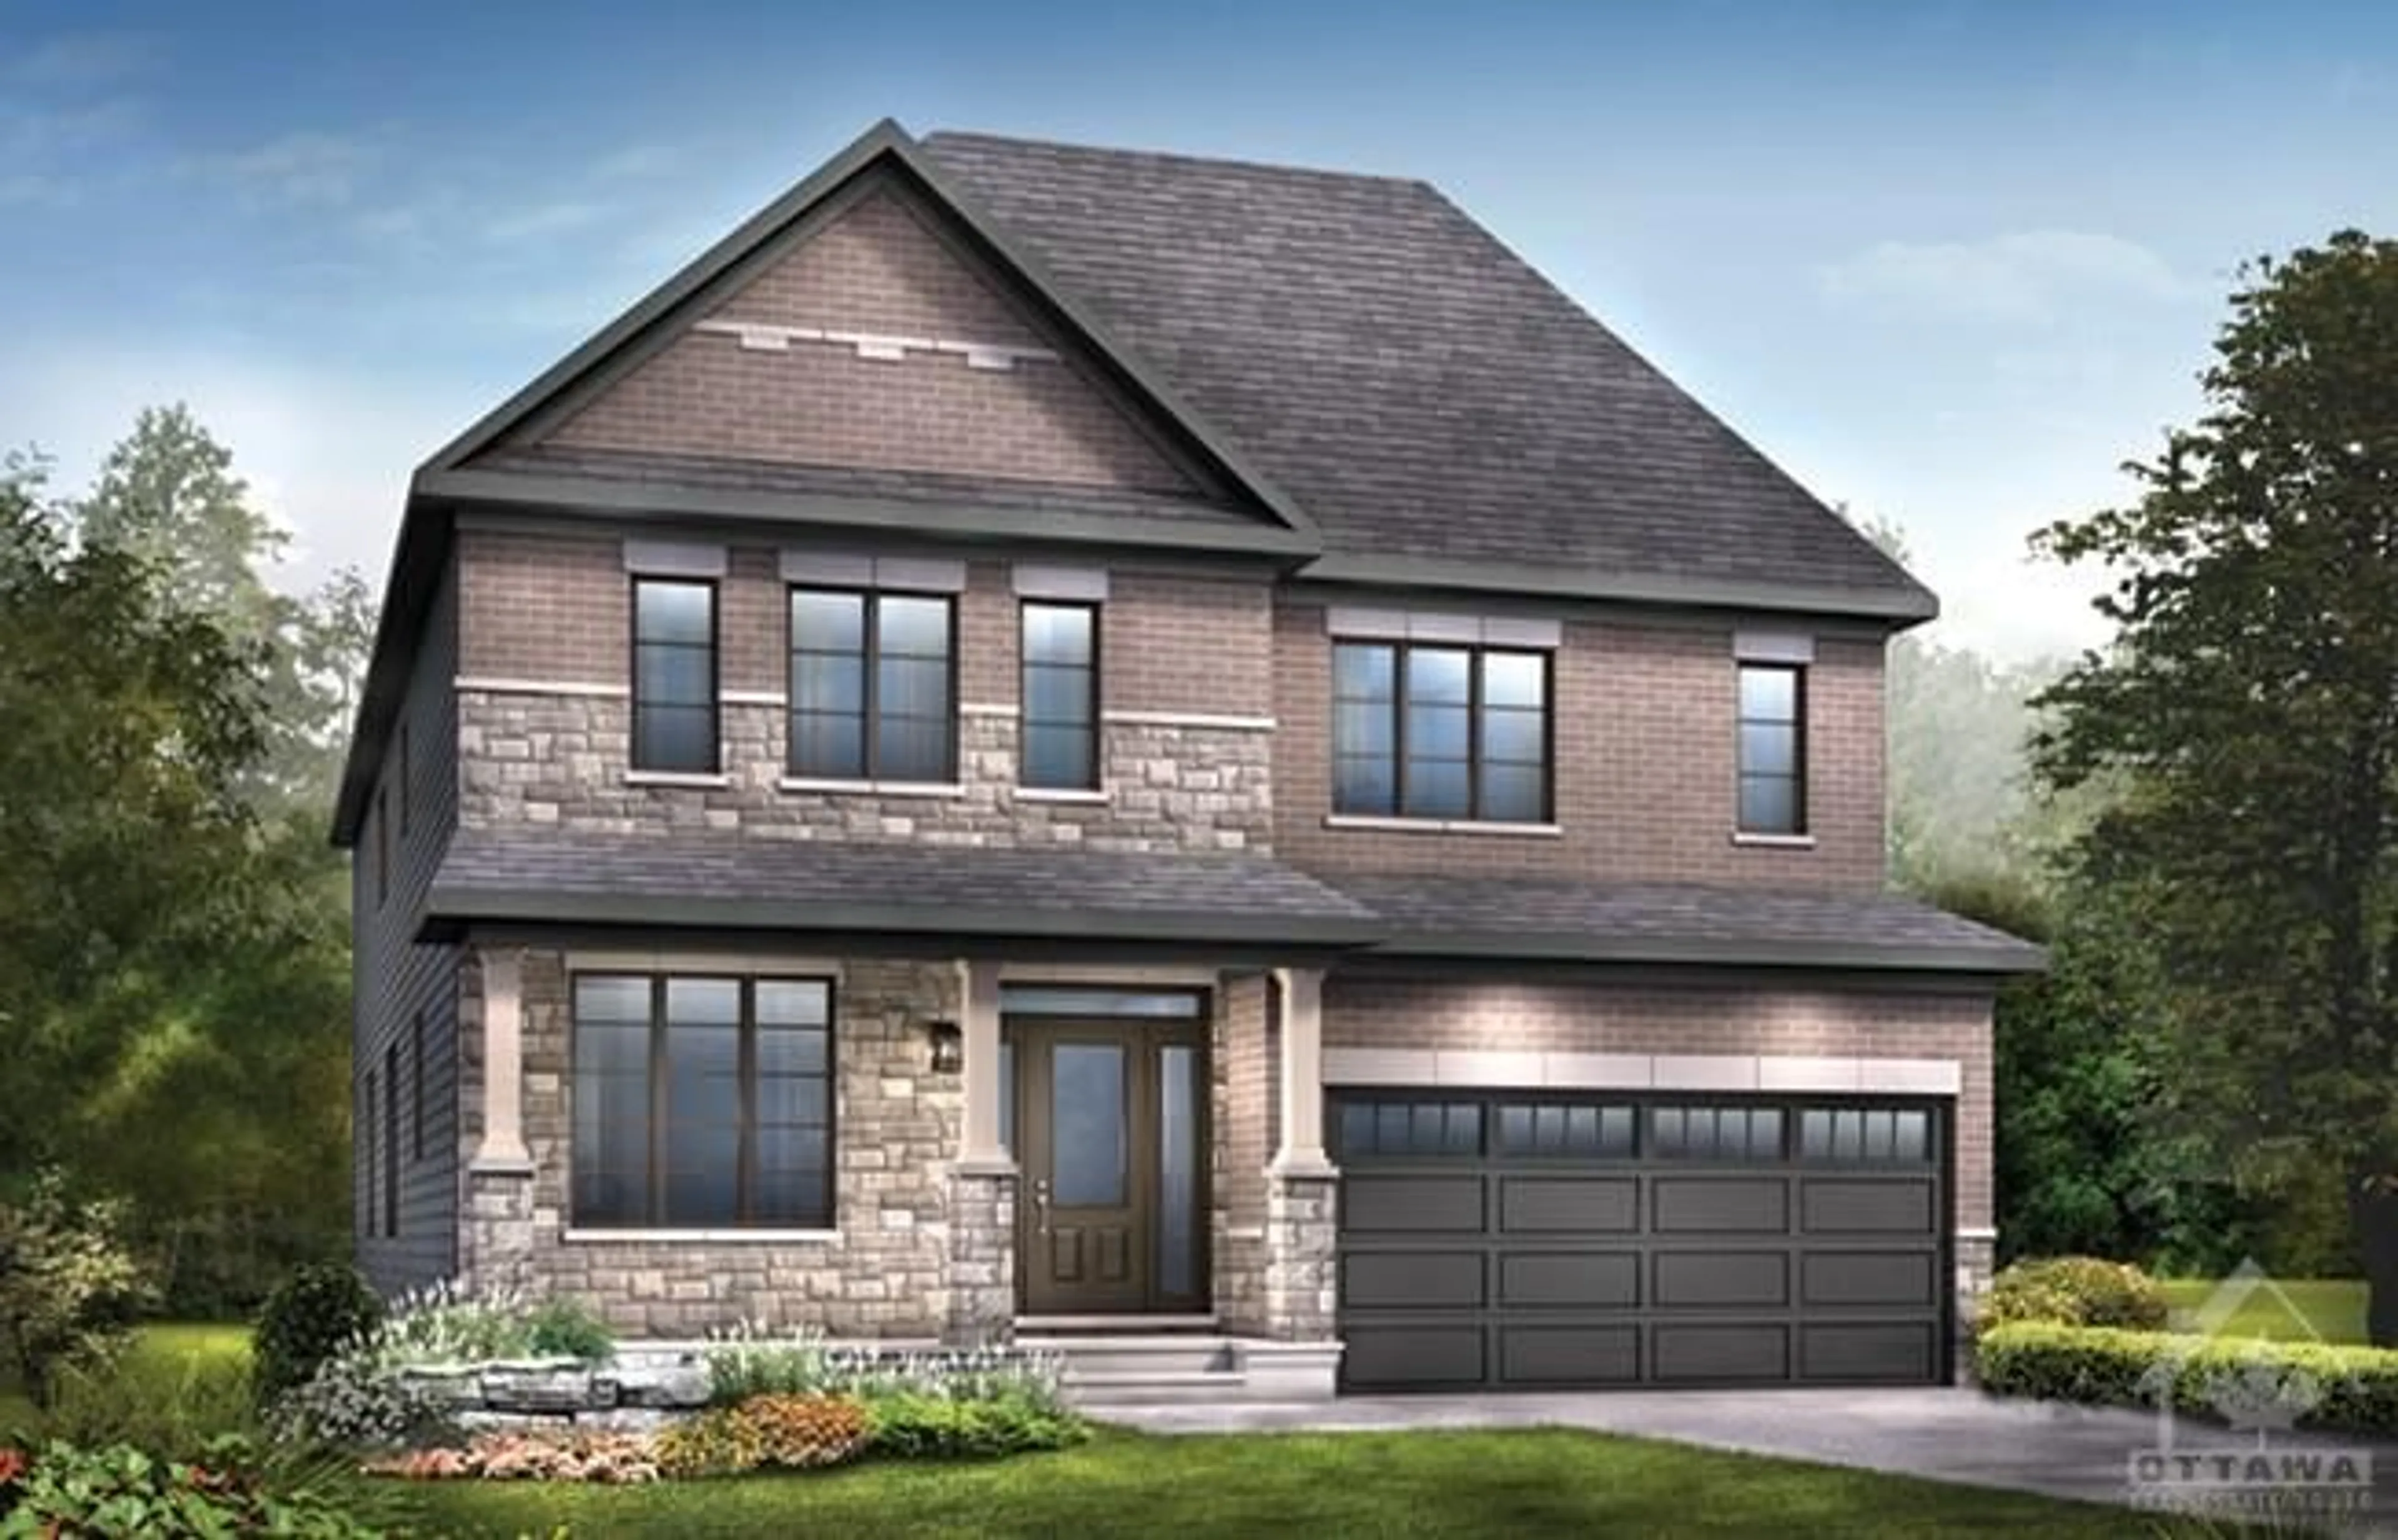 Home with brick exterior material for 622 INVER Lane, Ottawa Ontario K2J 7C4